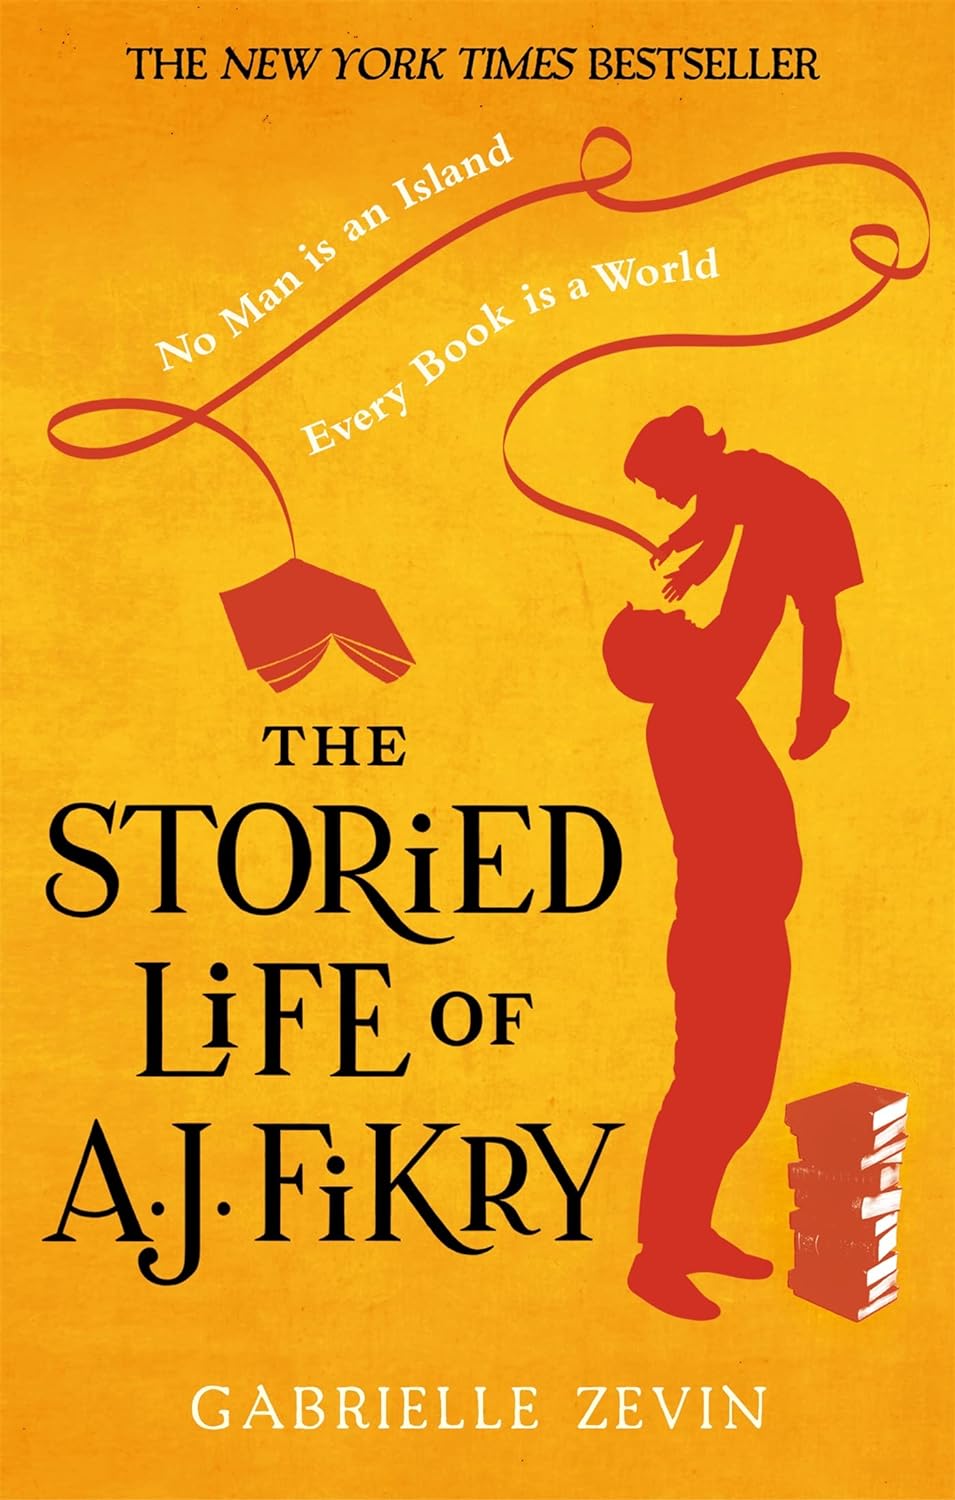 The Storied LIfe of A.J. Fikry by Gabrielle Zevin